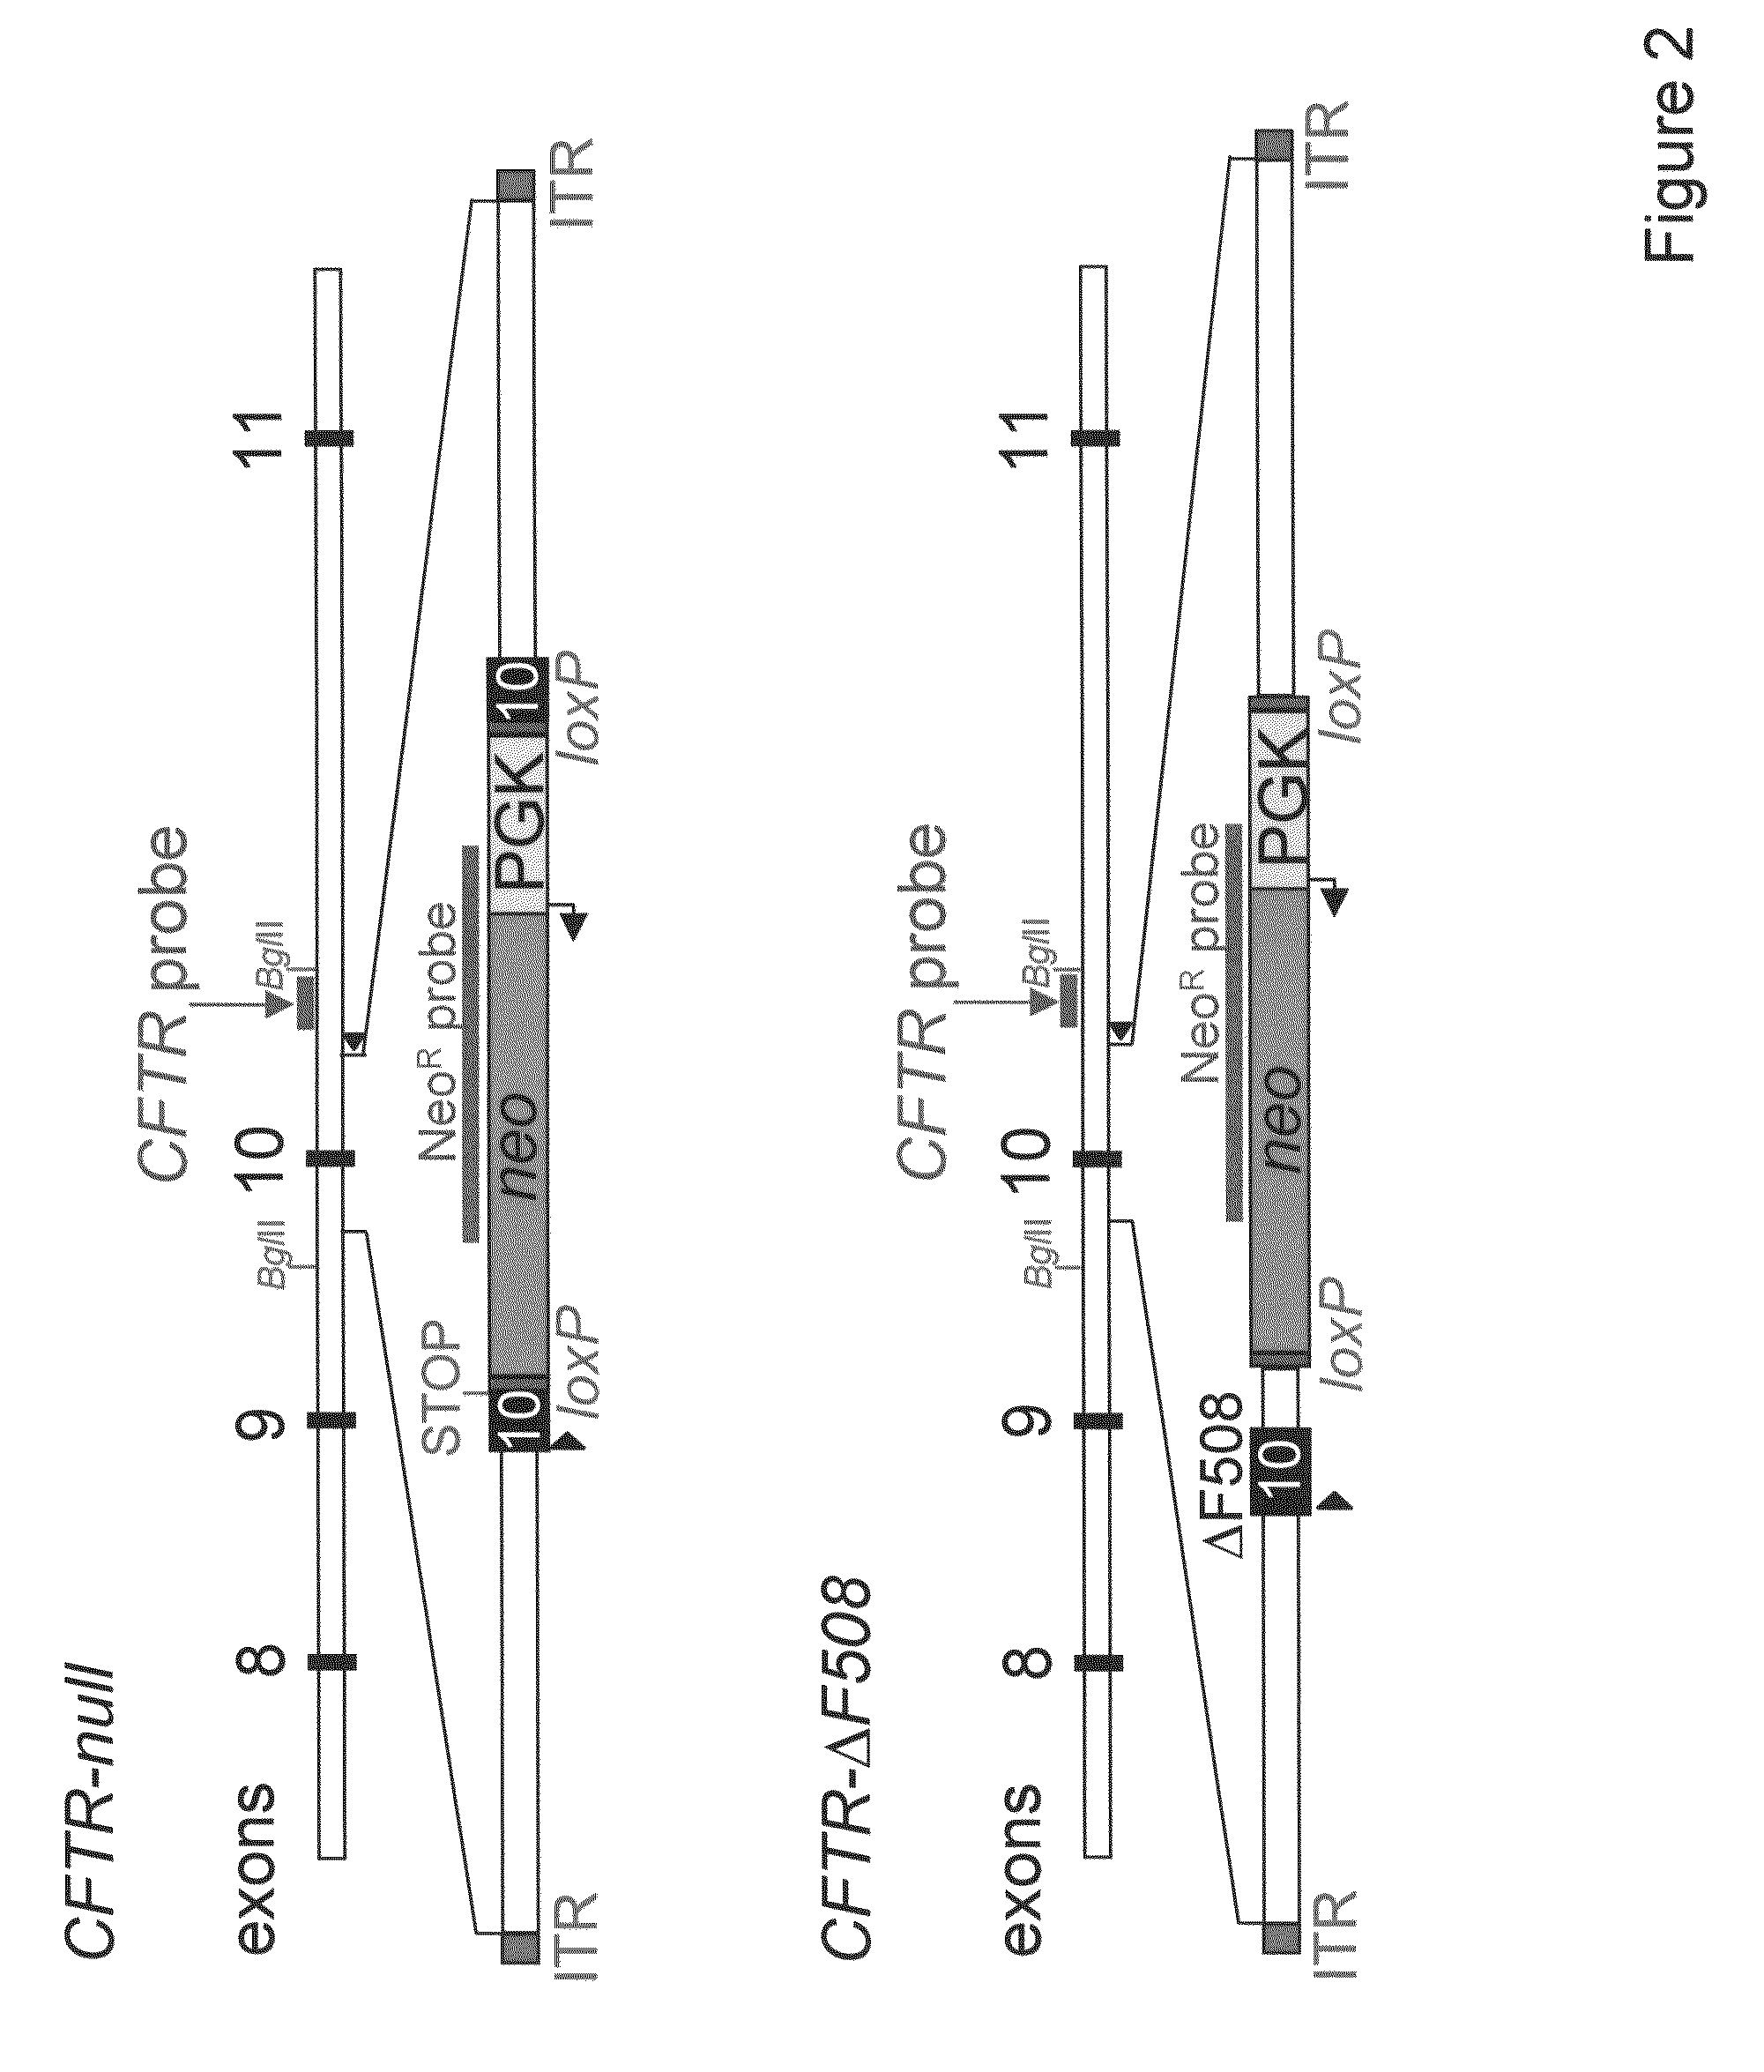 Method of identifying compounds using a transgenic pig model of cystic fibrosis